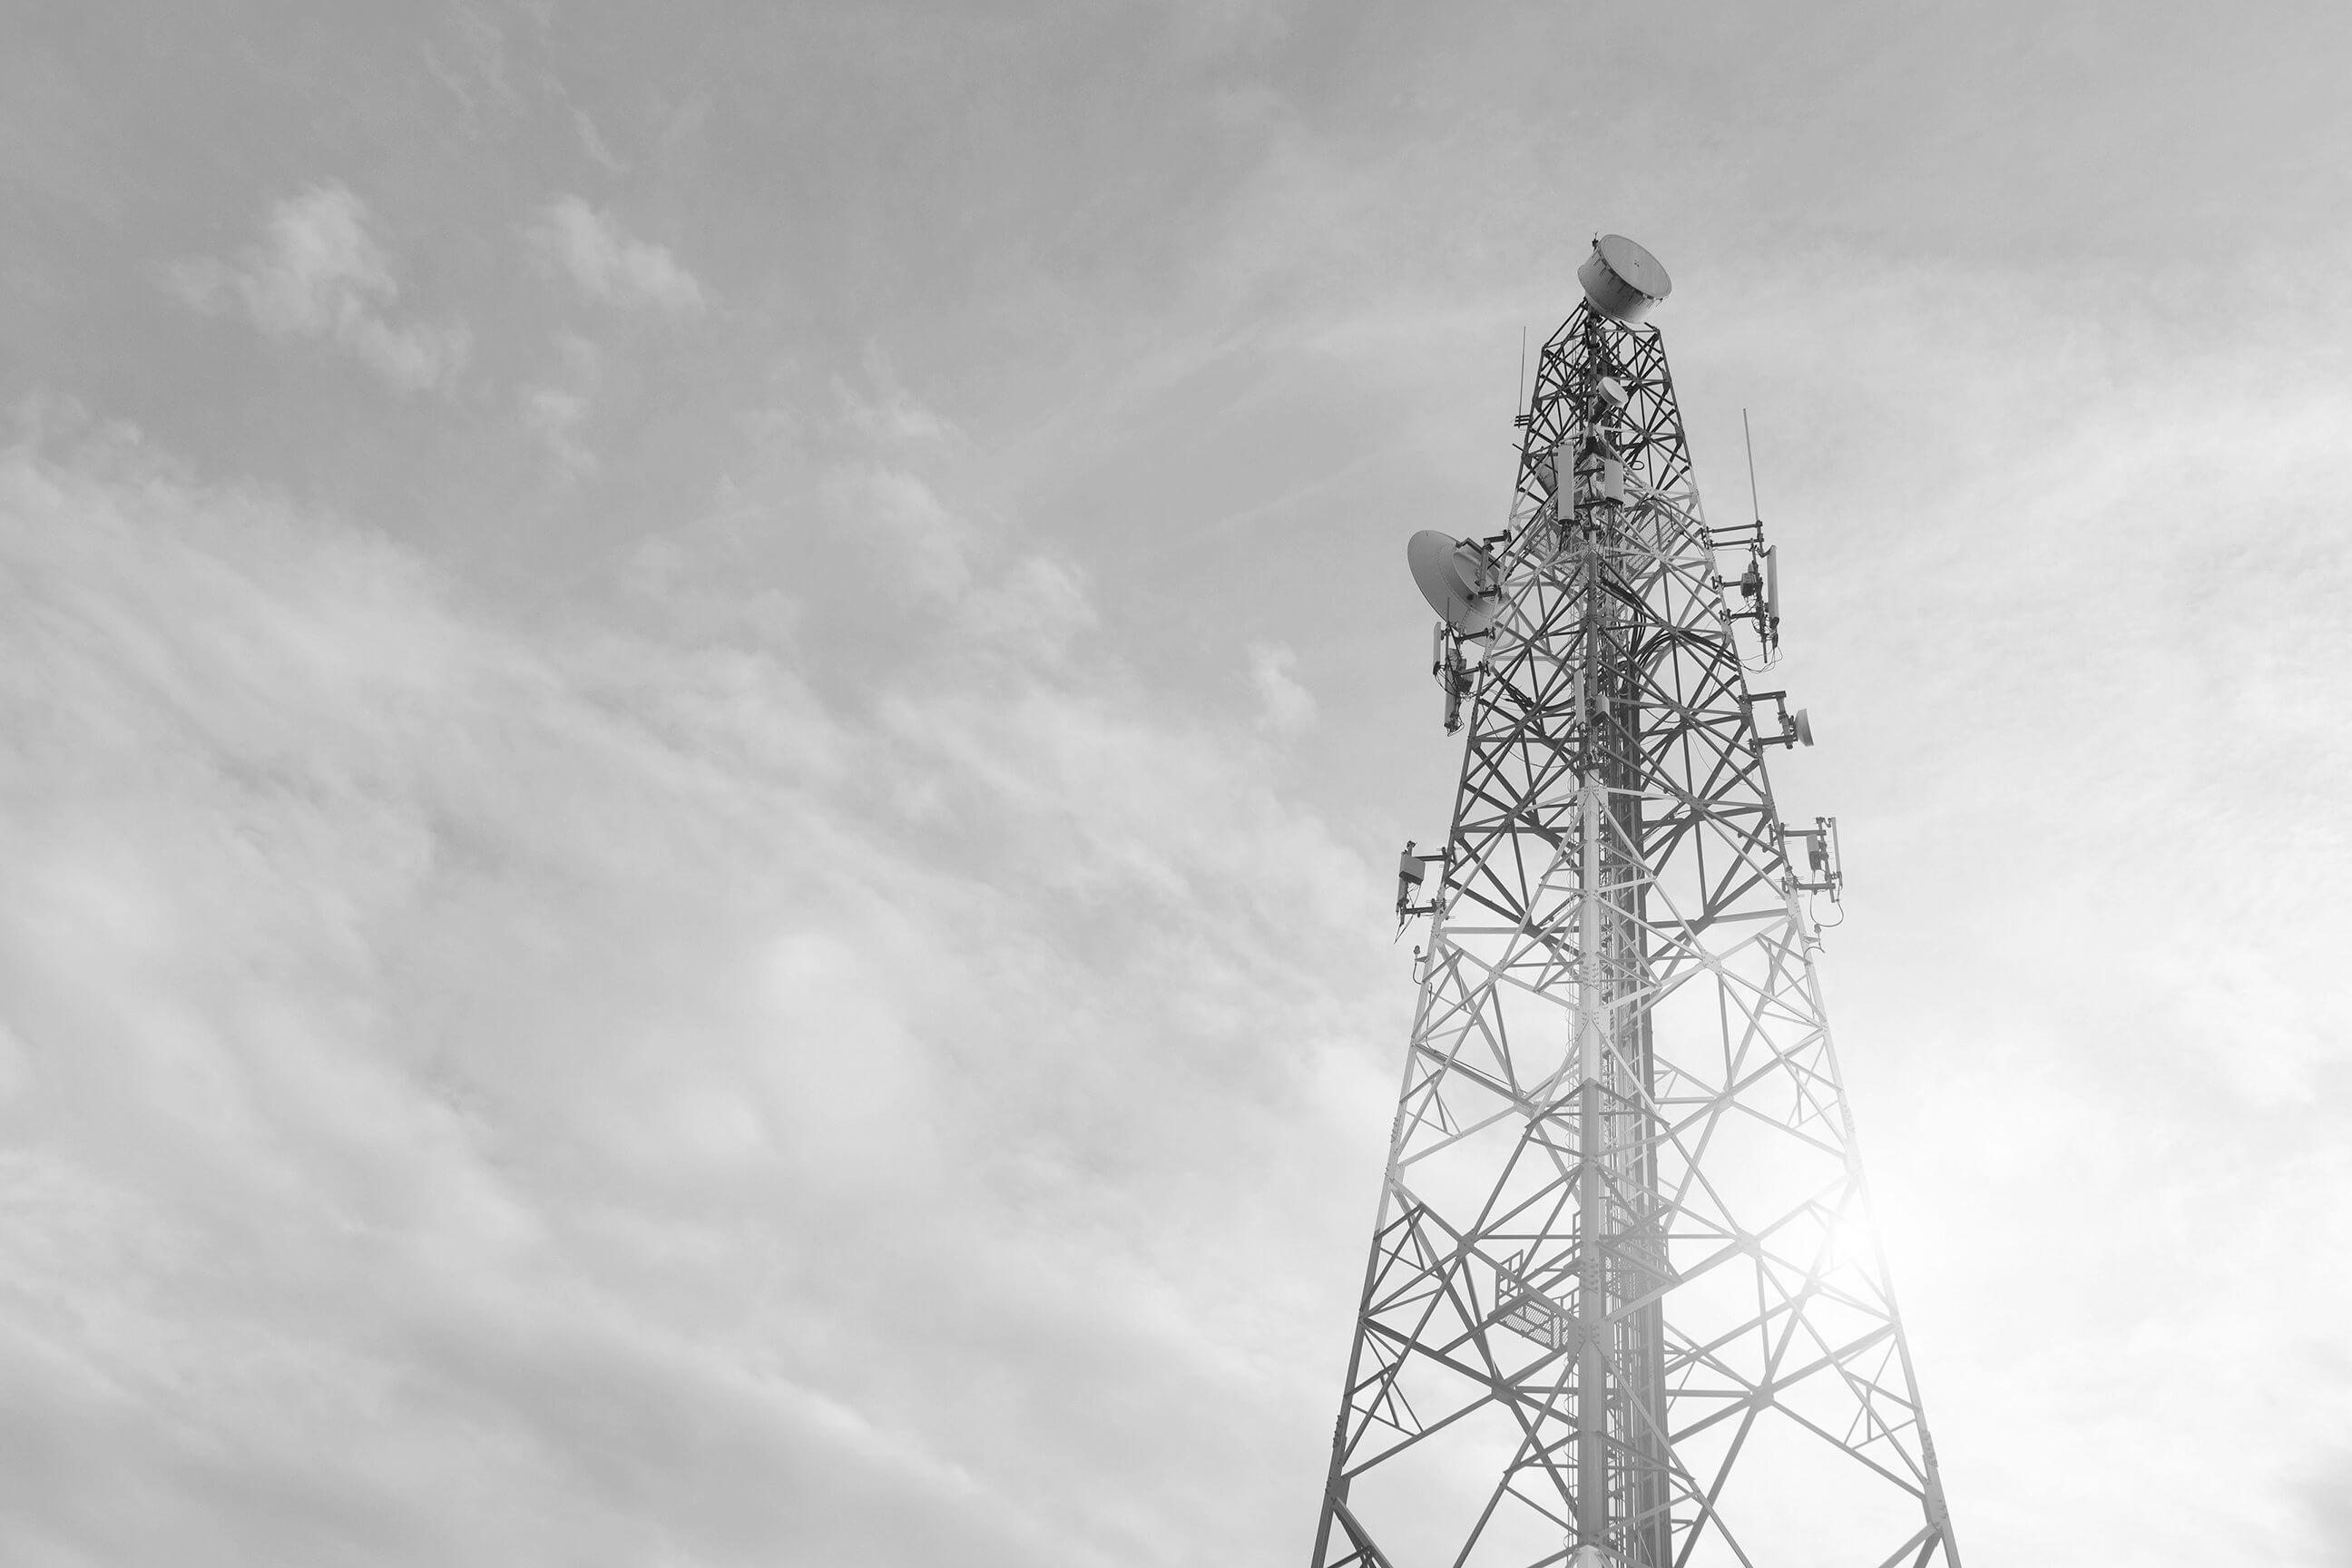 Radio broadcasting. Low-angle view of a telecommunications broadcasting tower.